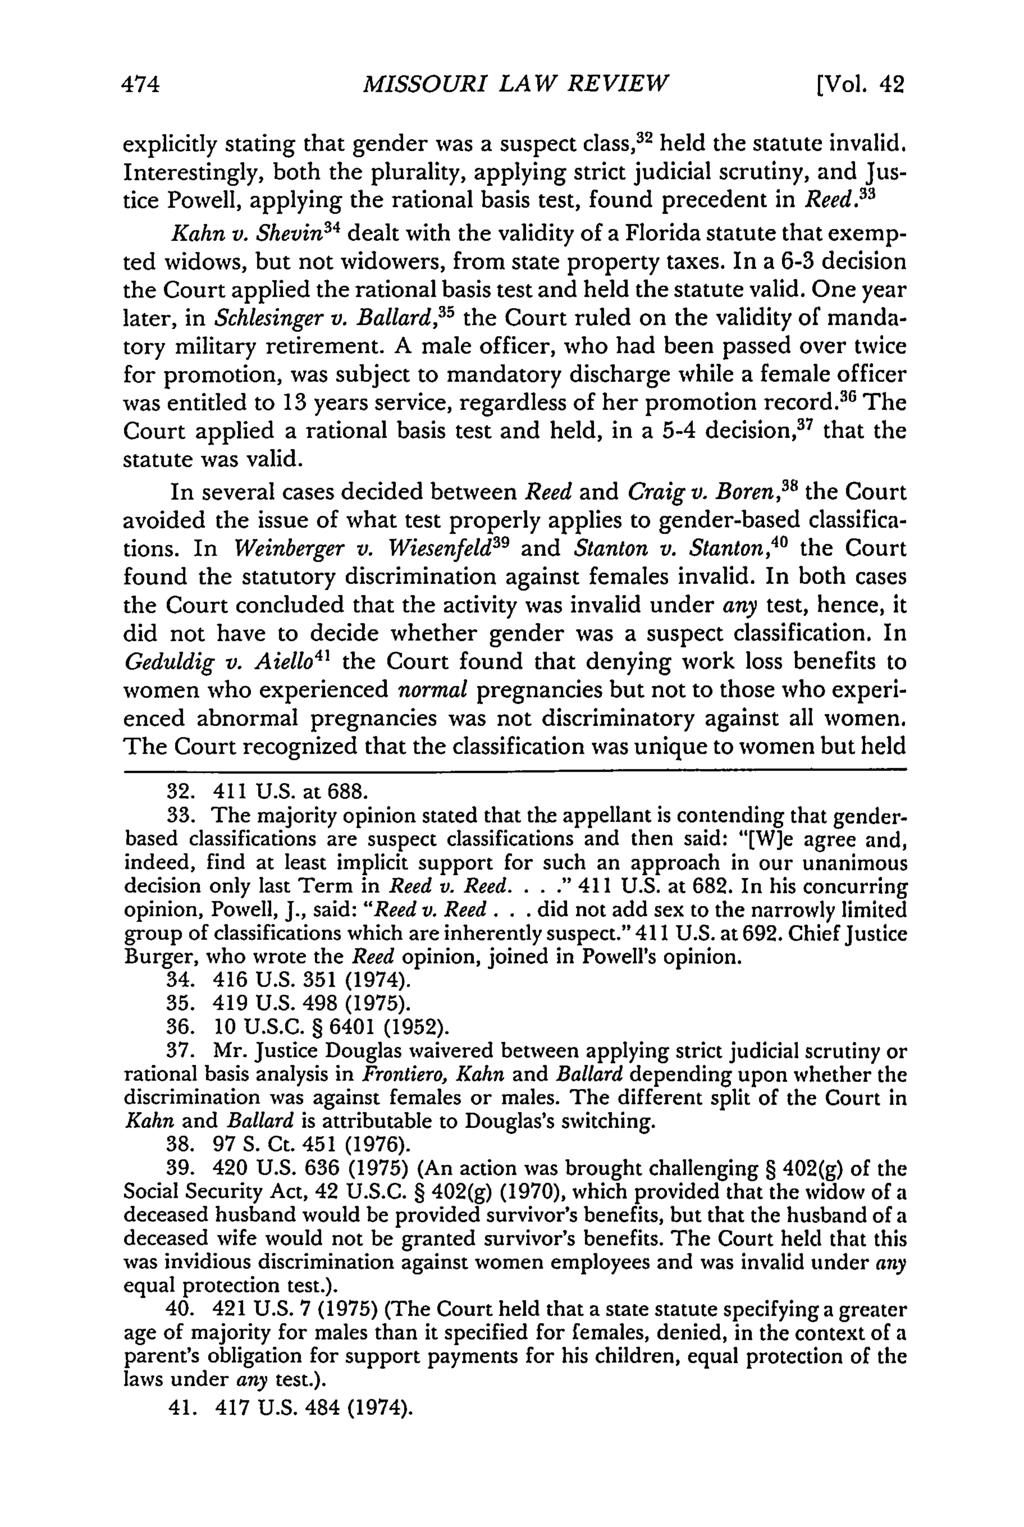 Carew: Carew: Constitutional Law-Gender Classifications MISSOURI LAW REVIEW [Vol. 42 explicitly stating that gender was a suspect class, 3 2 held the statute invalid.